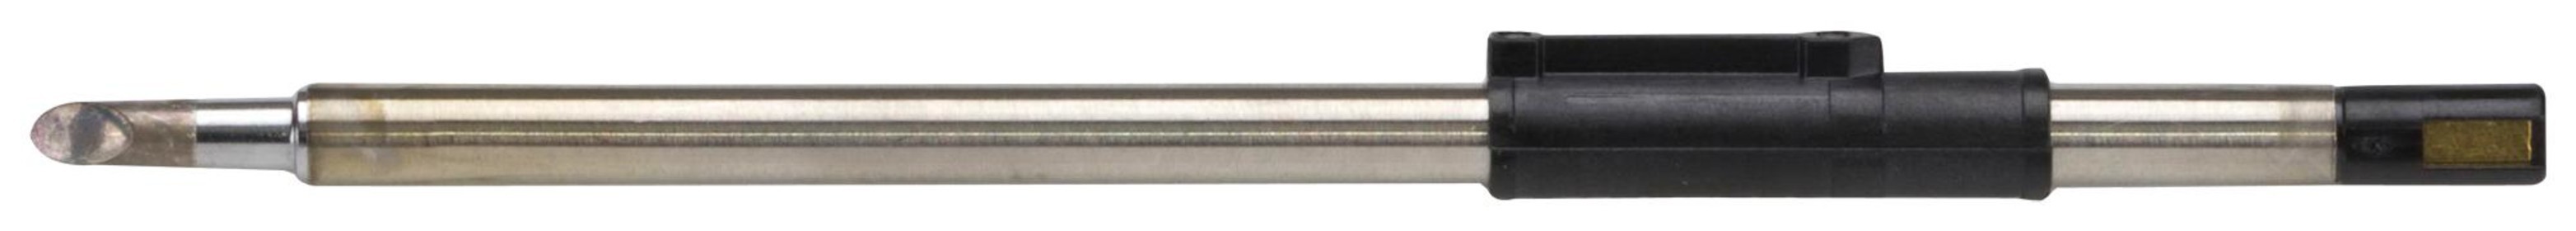 Pace 1124-0034-P1 Tip Cartridge, Chisel, Single Sided